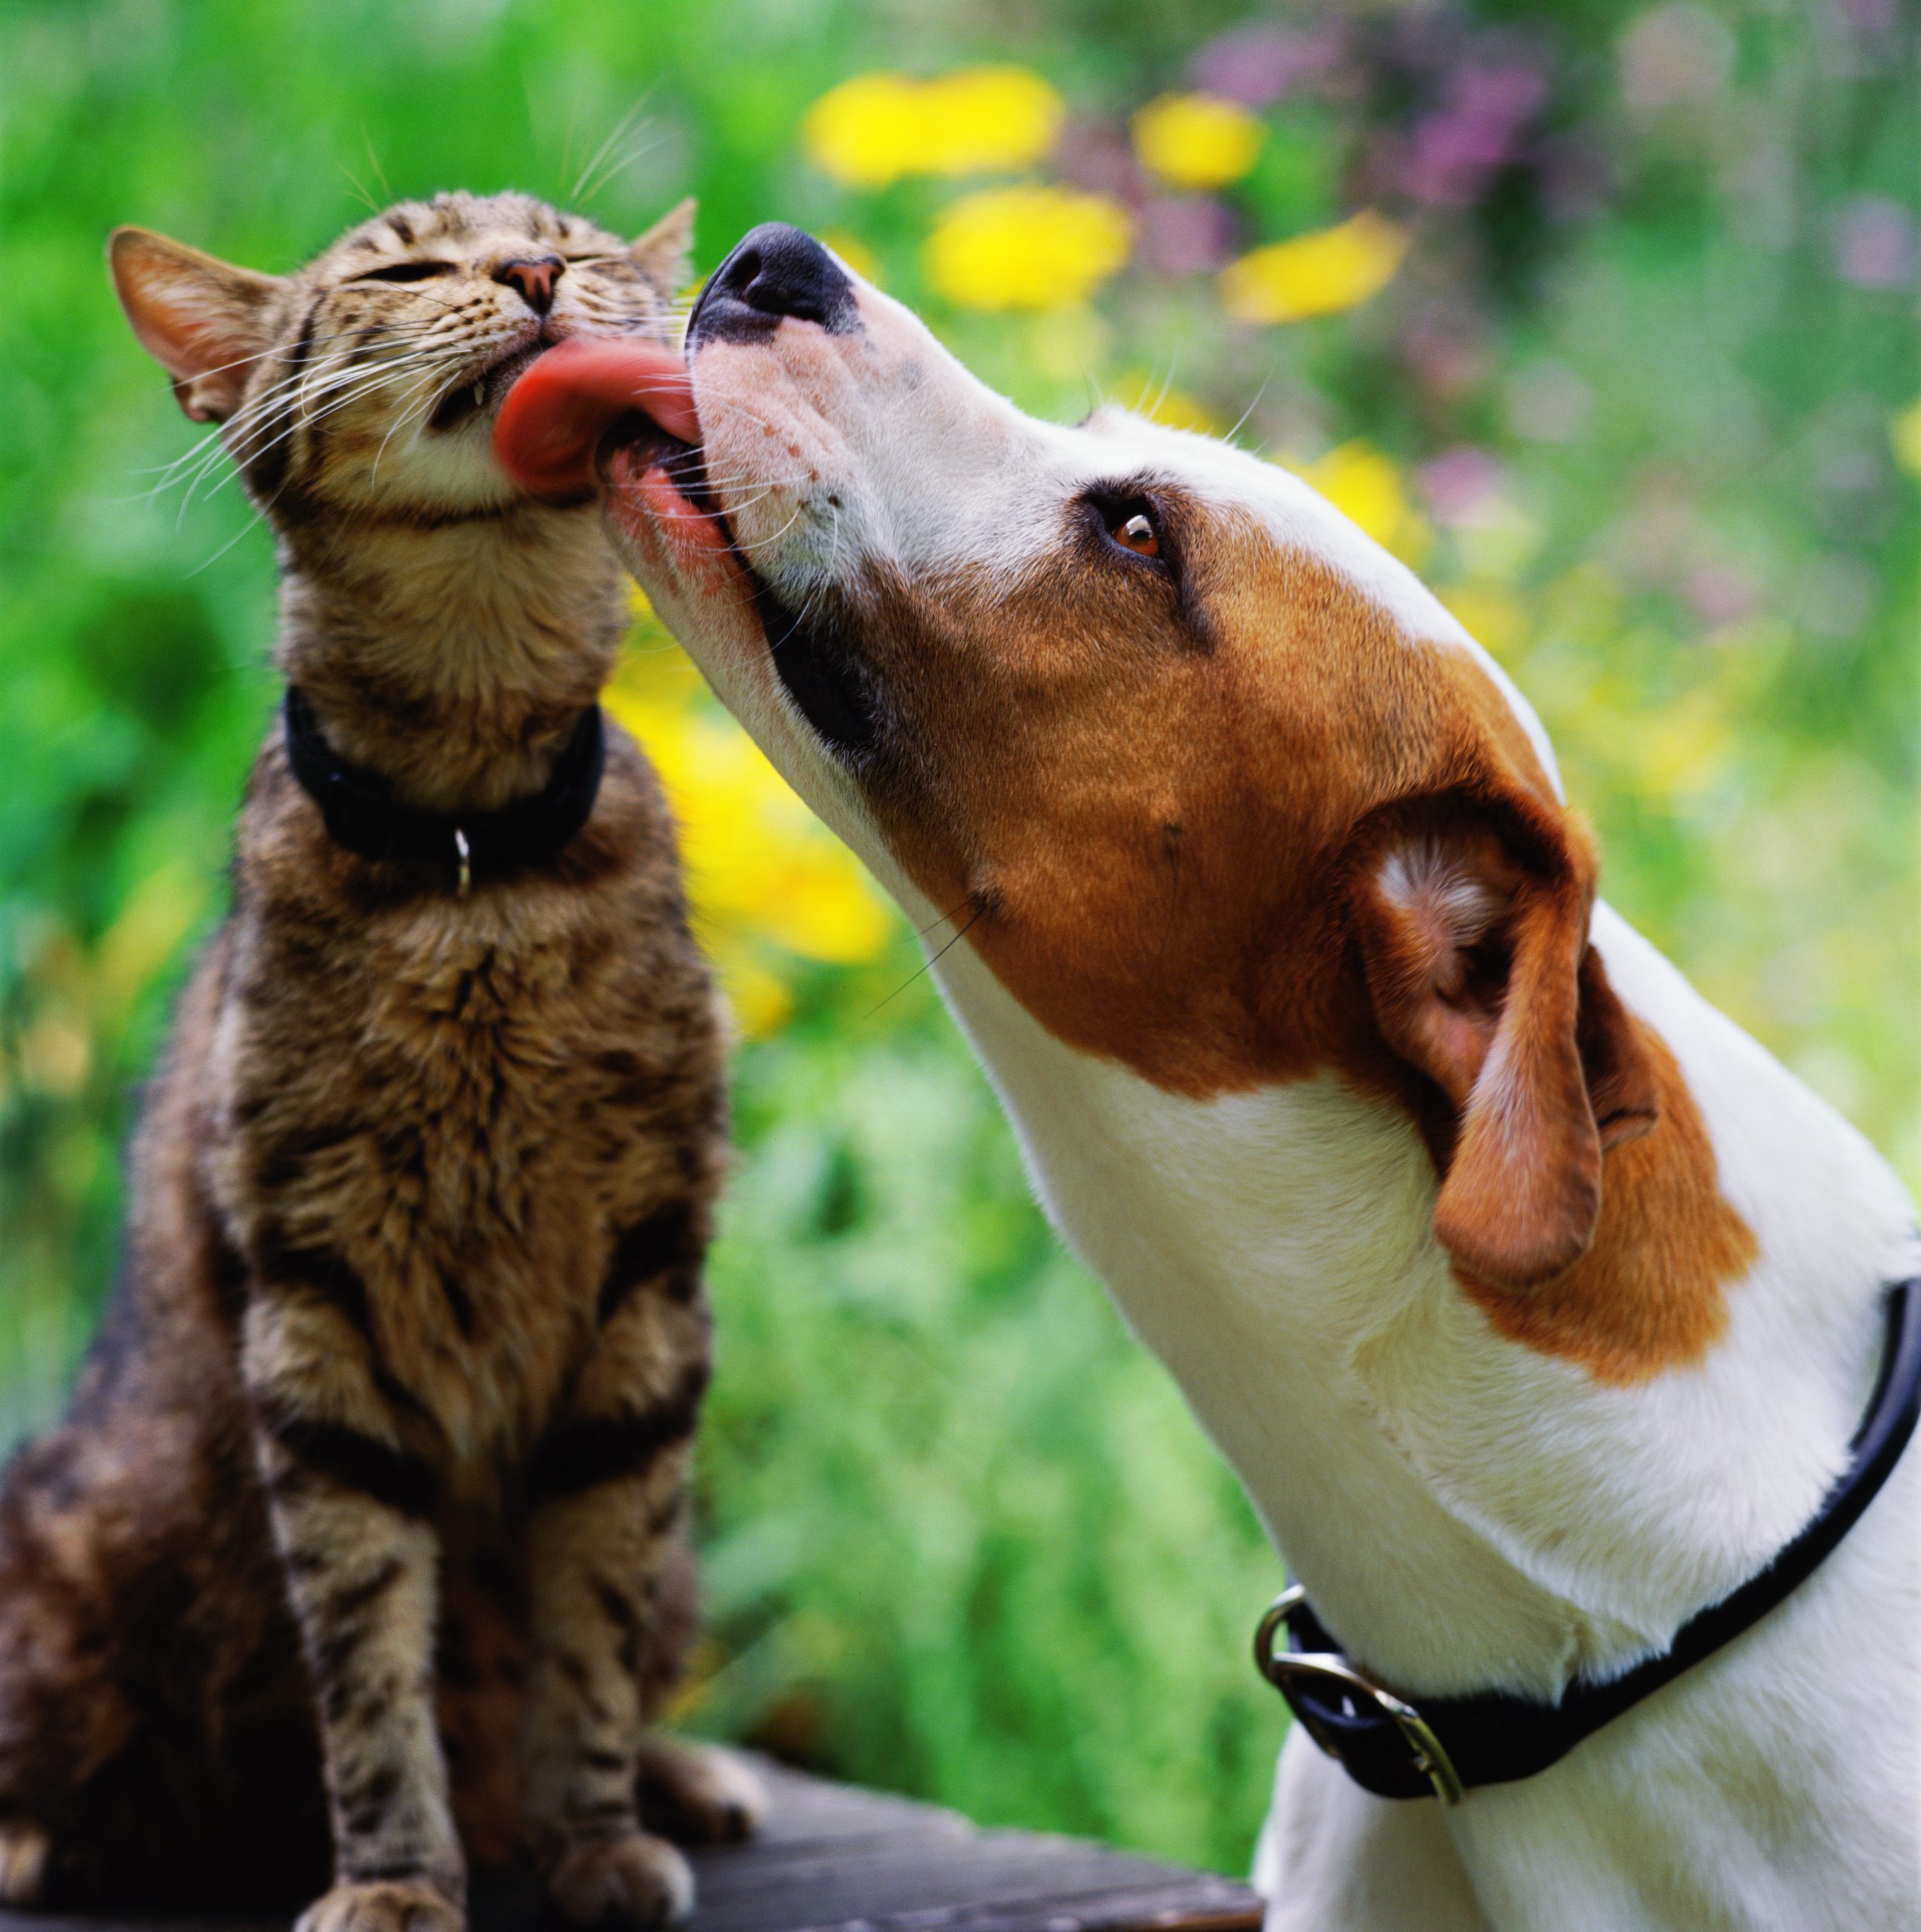 Brown and white dog licking tabby cat